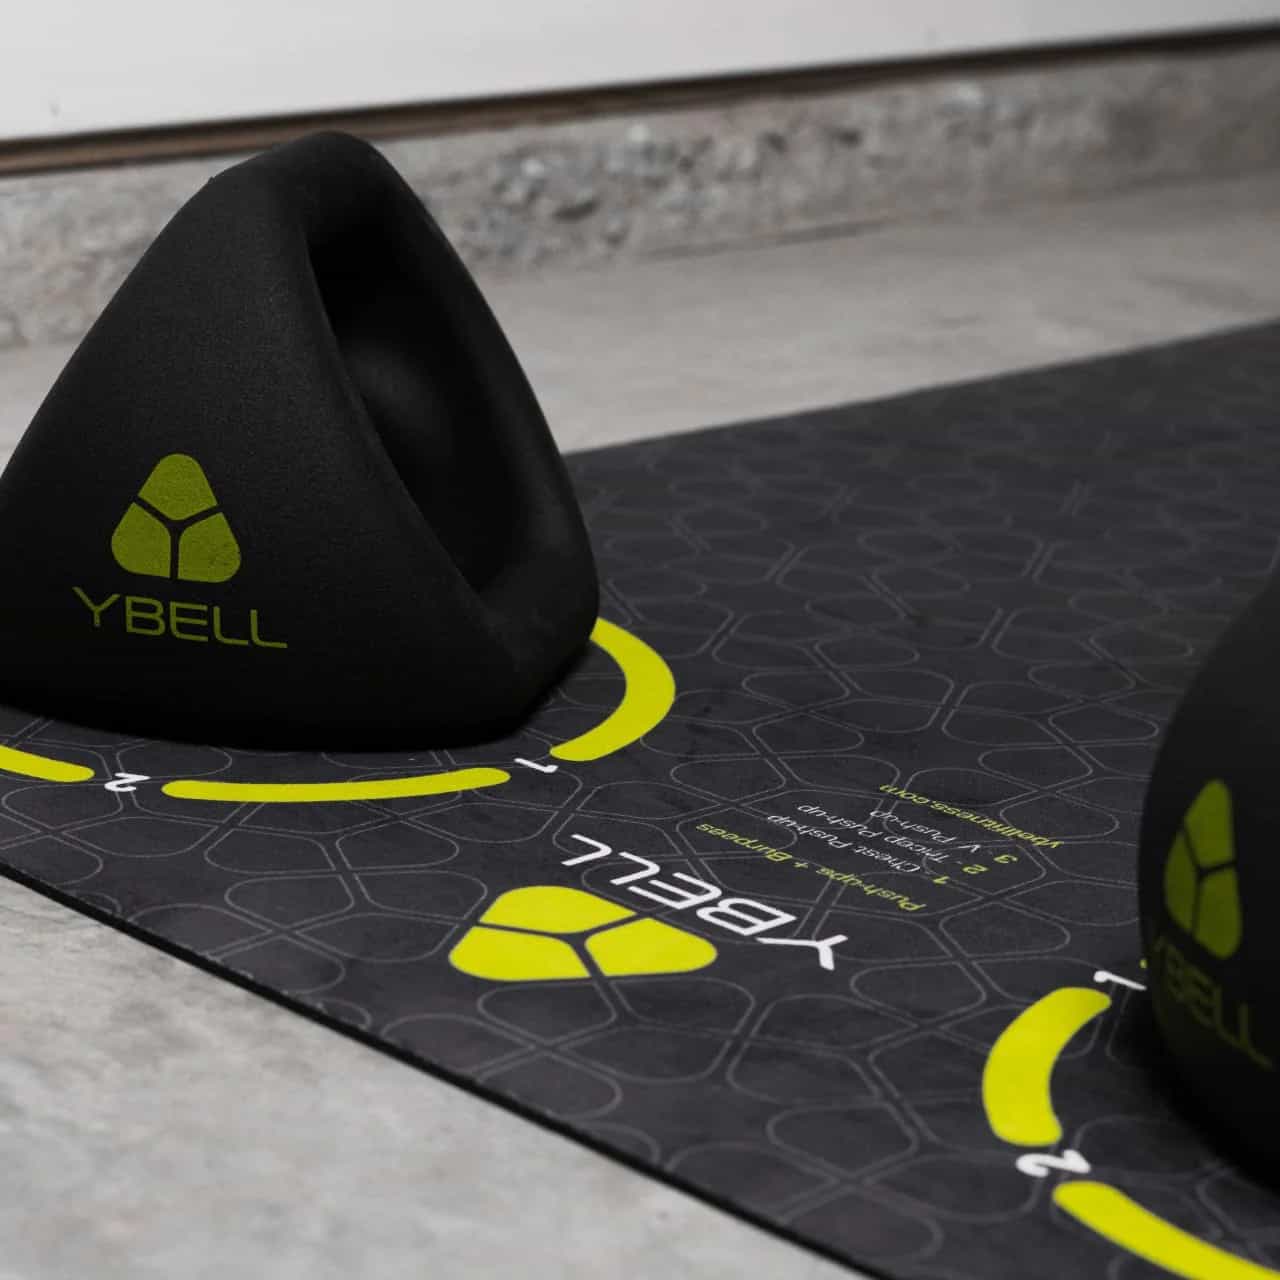 TRX YBELL Exercise Mats mat and ybell